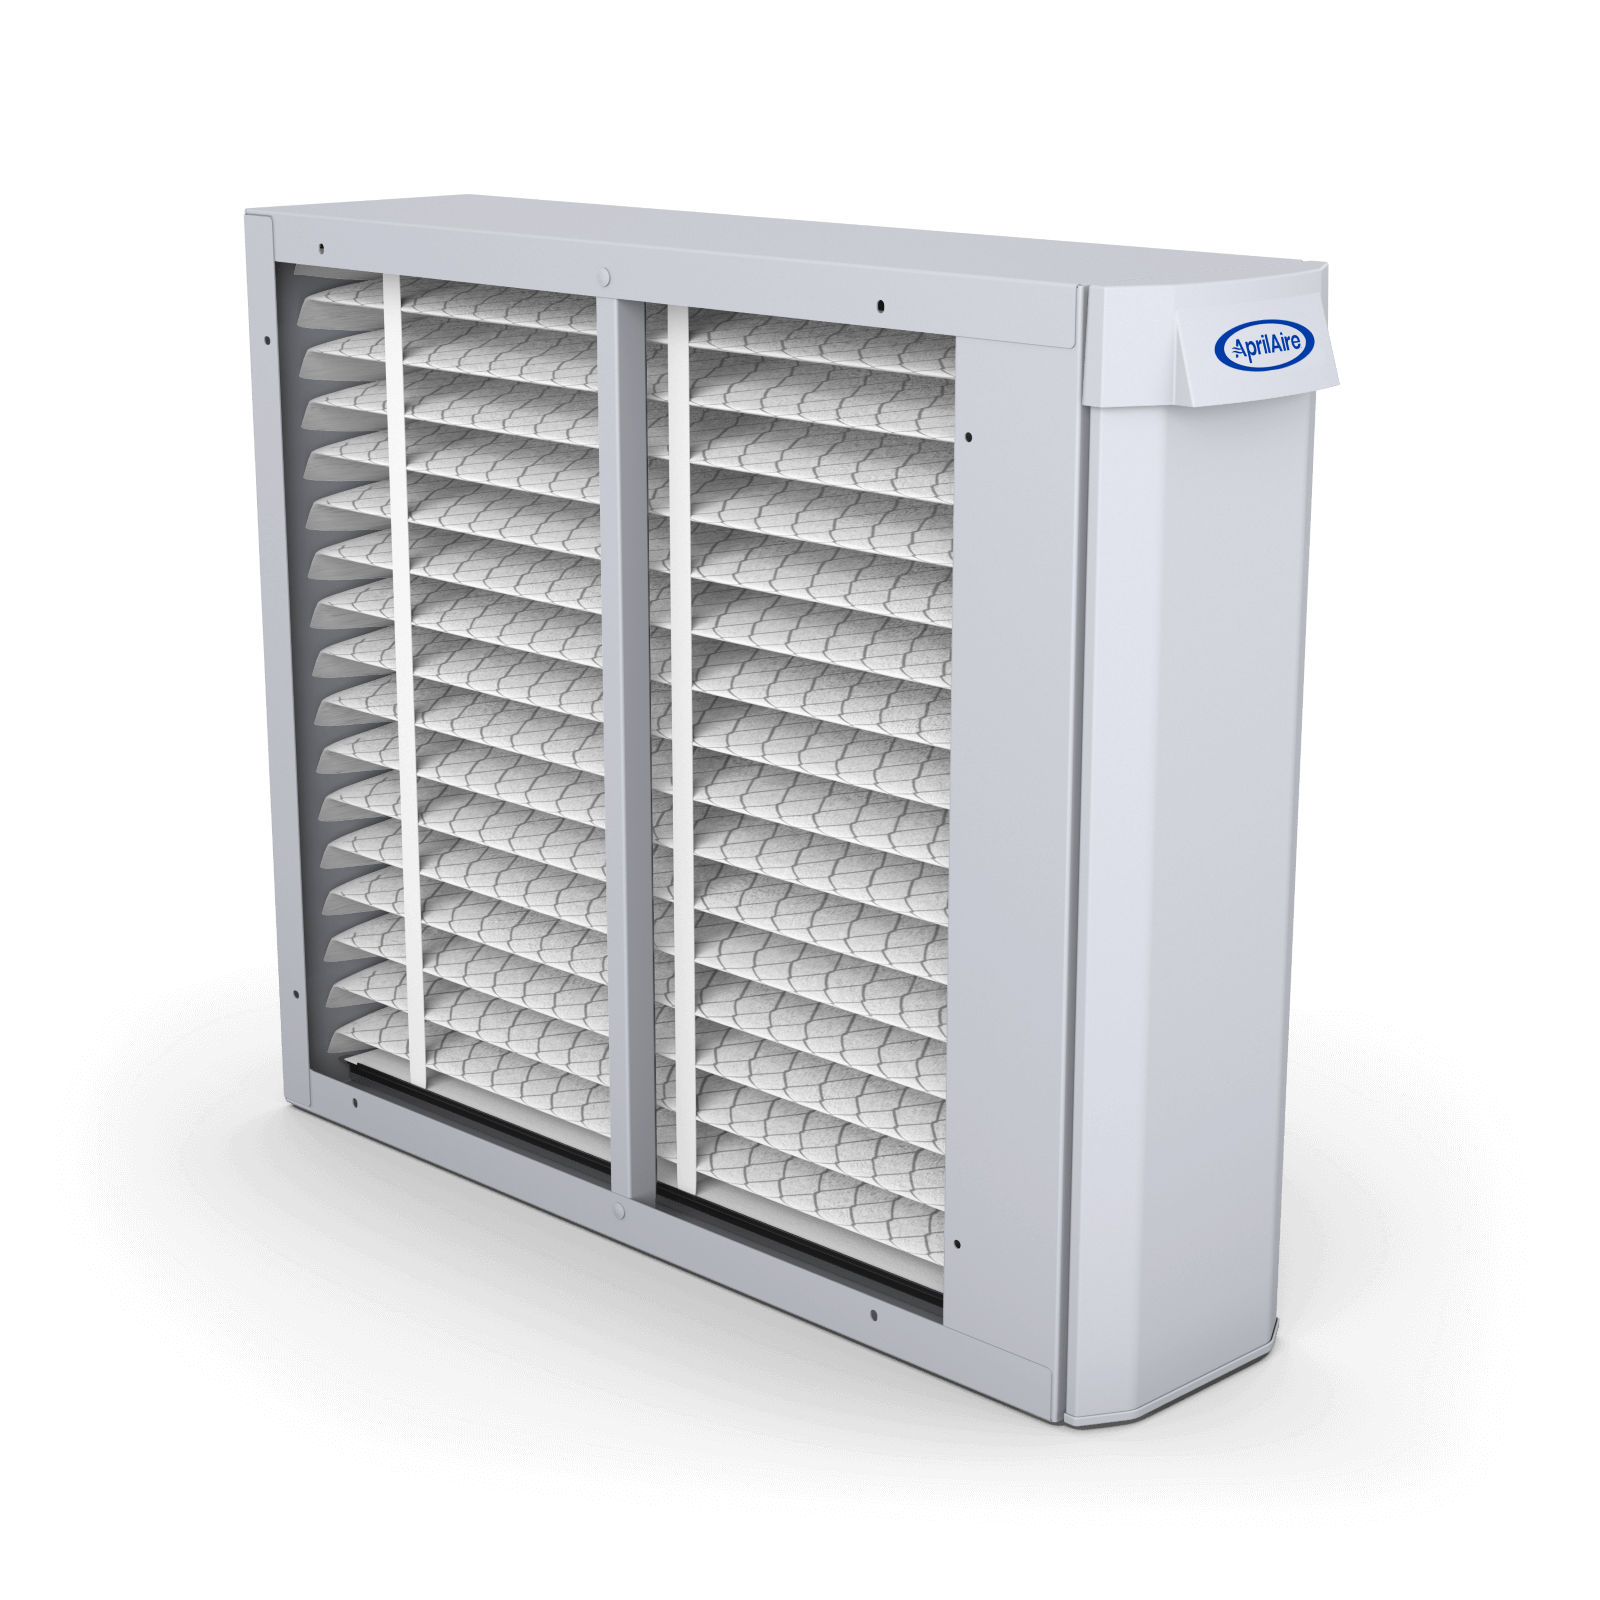 Air Treatment, Air Purifiers, Heaters, Fans, Humidifiers, Purifier Filters